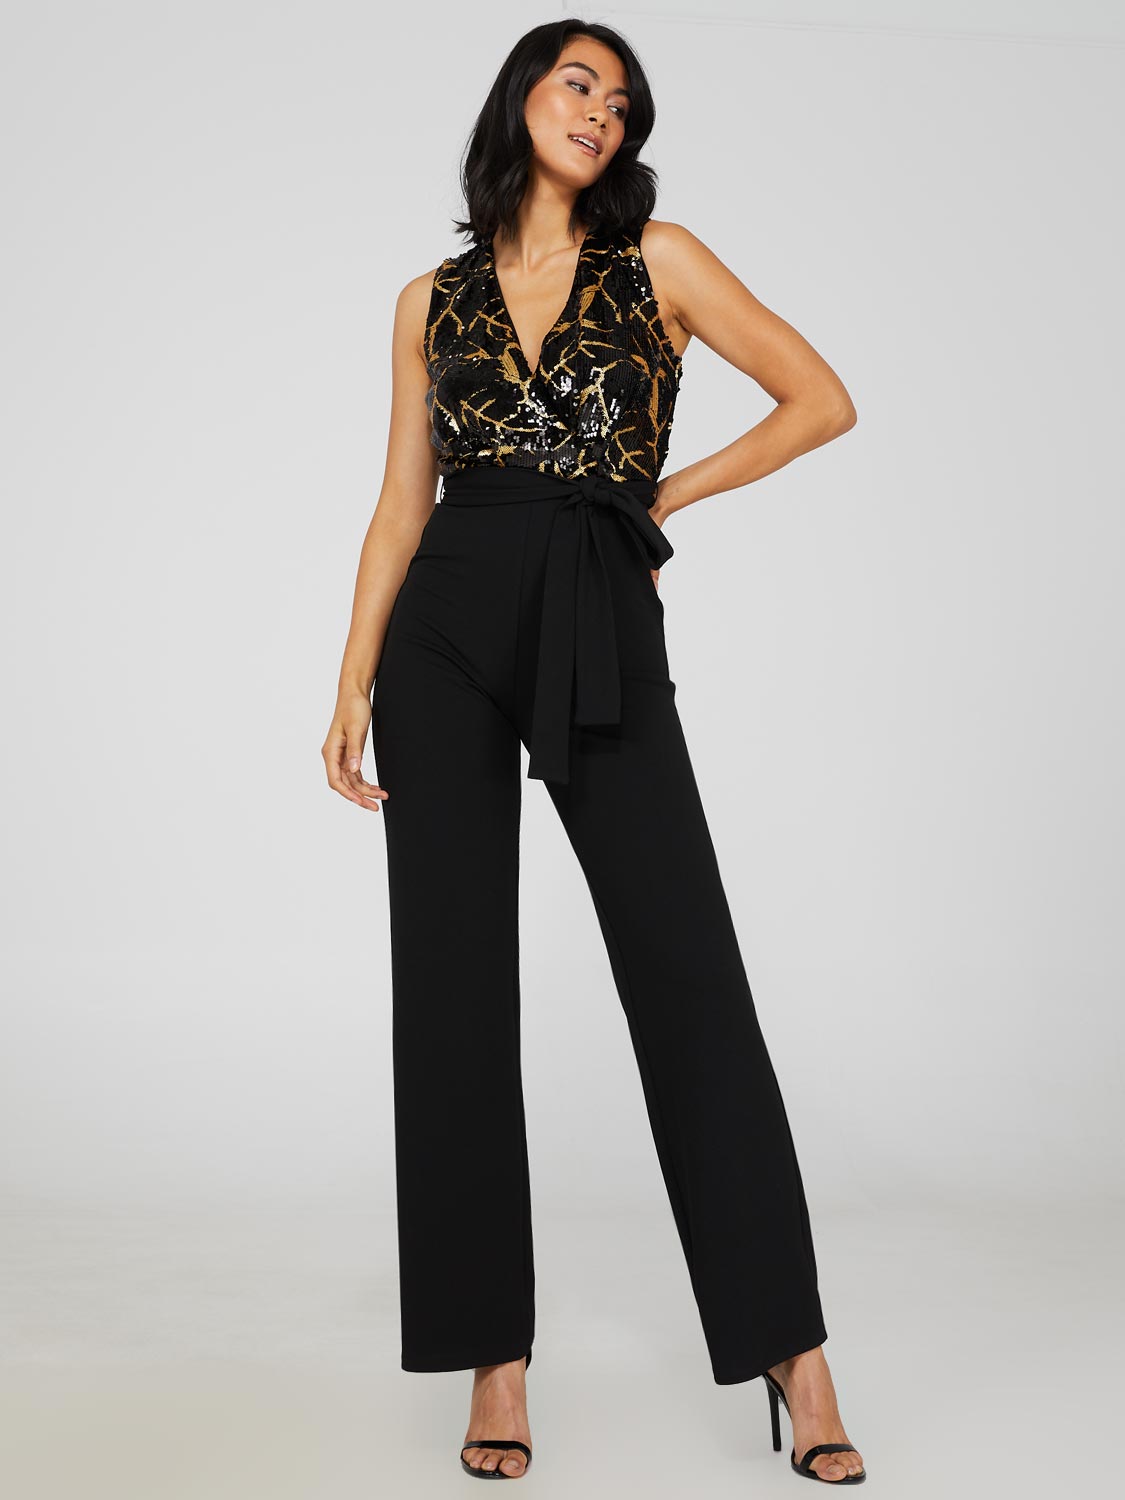 Best Deal for Shiny Sequin Jumpsuit for Women 2023 Generic B0b76wh494